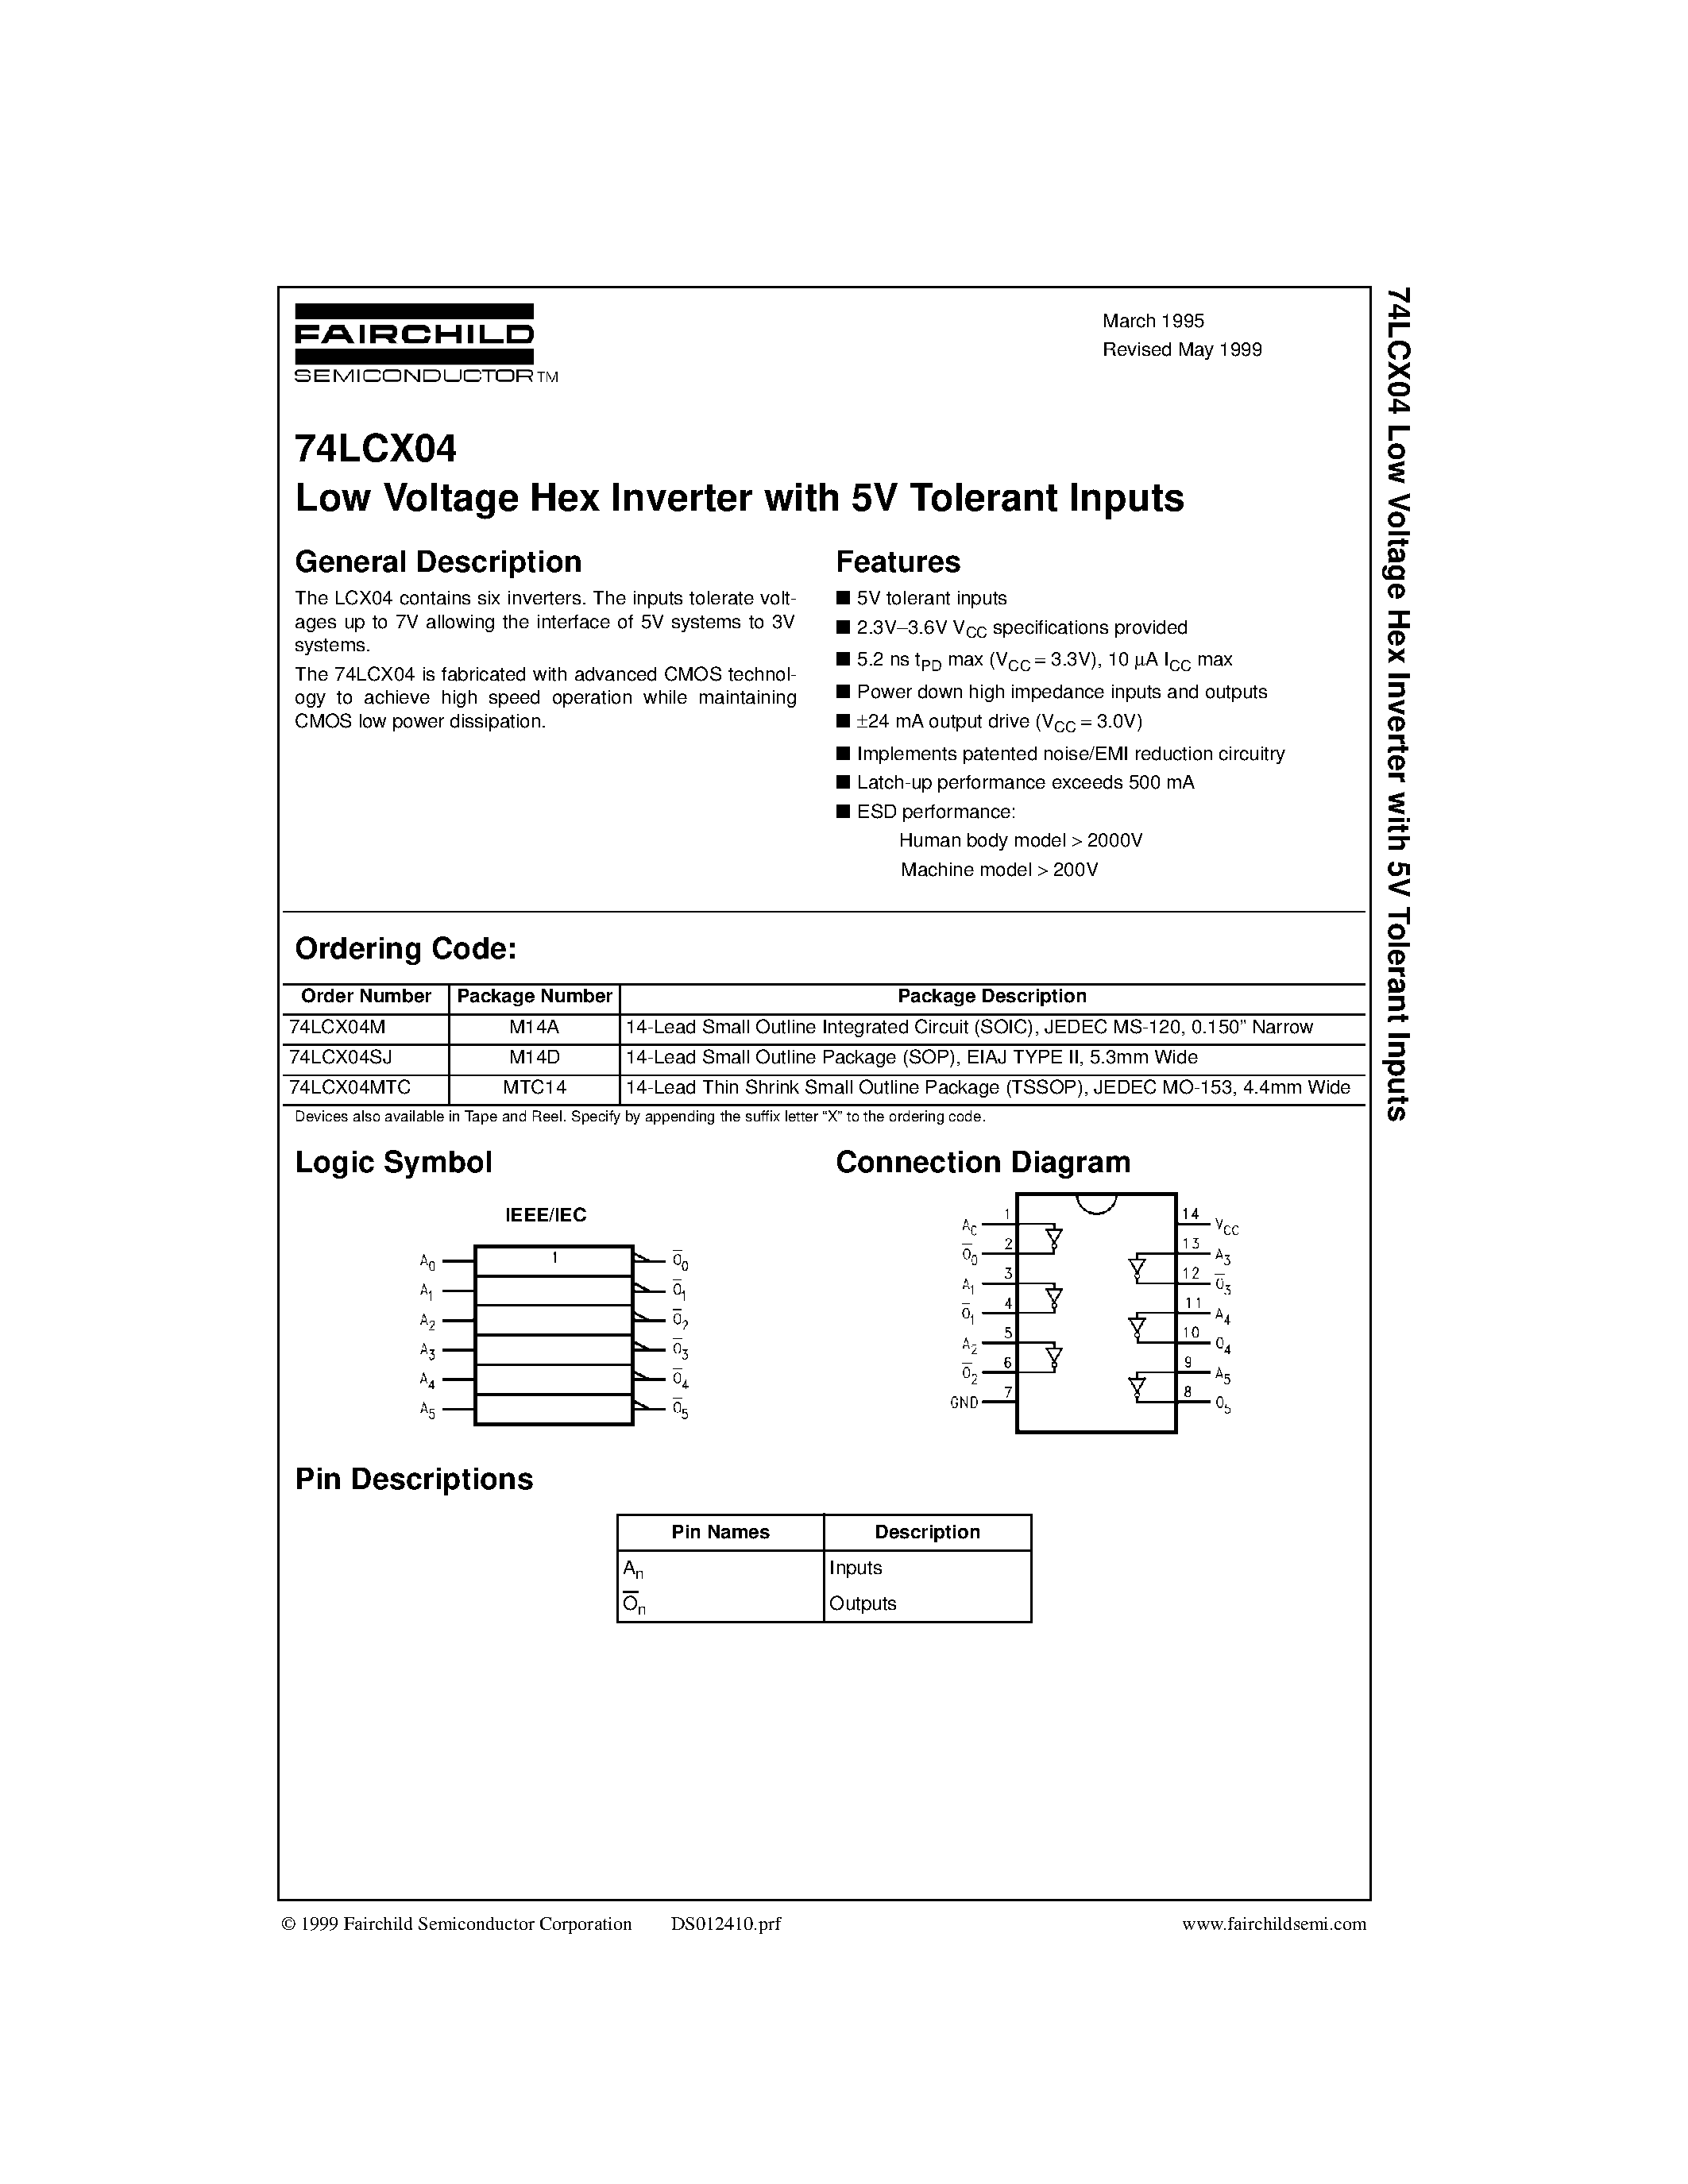 Datasheet 74LCX04SJ - Low Voltage Hex Inverter with 5V Tolerant Inputs page 1